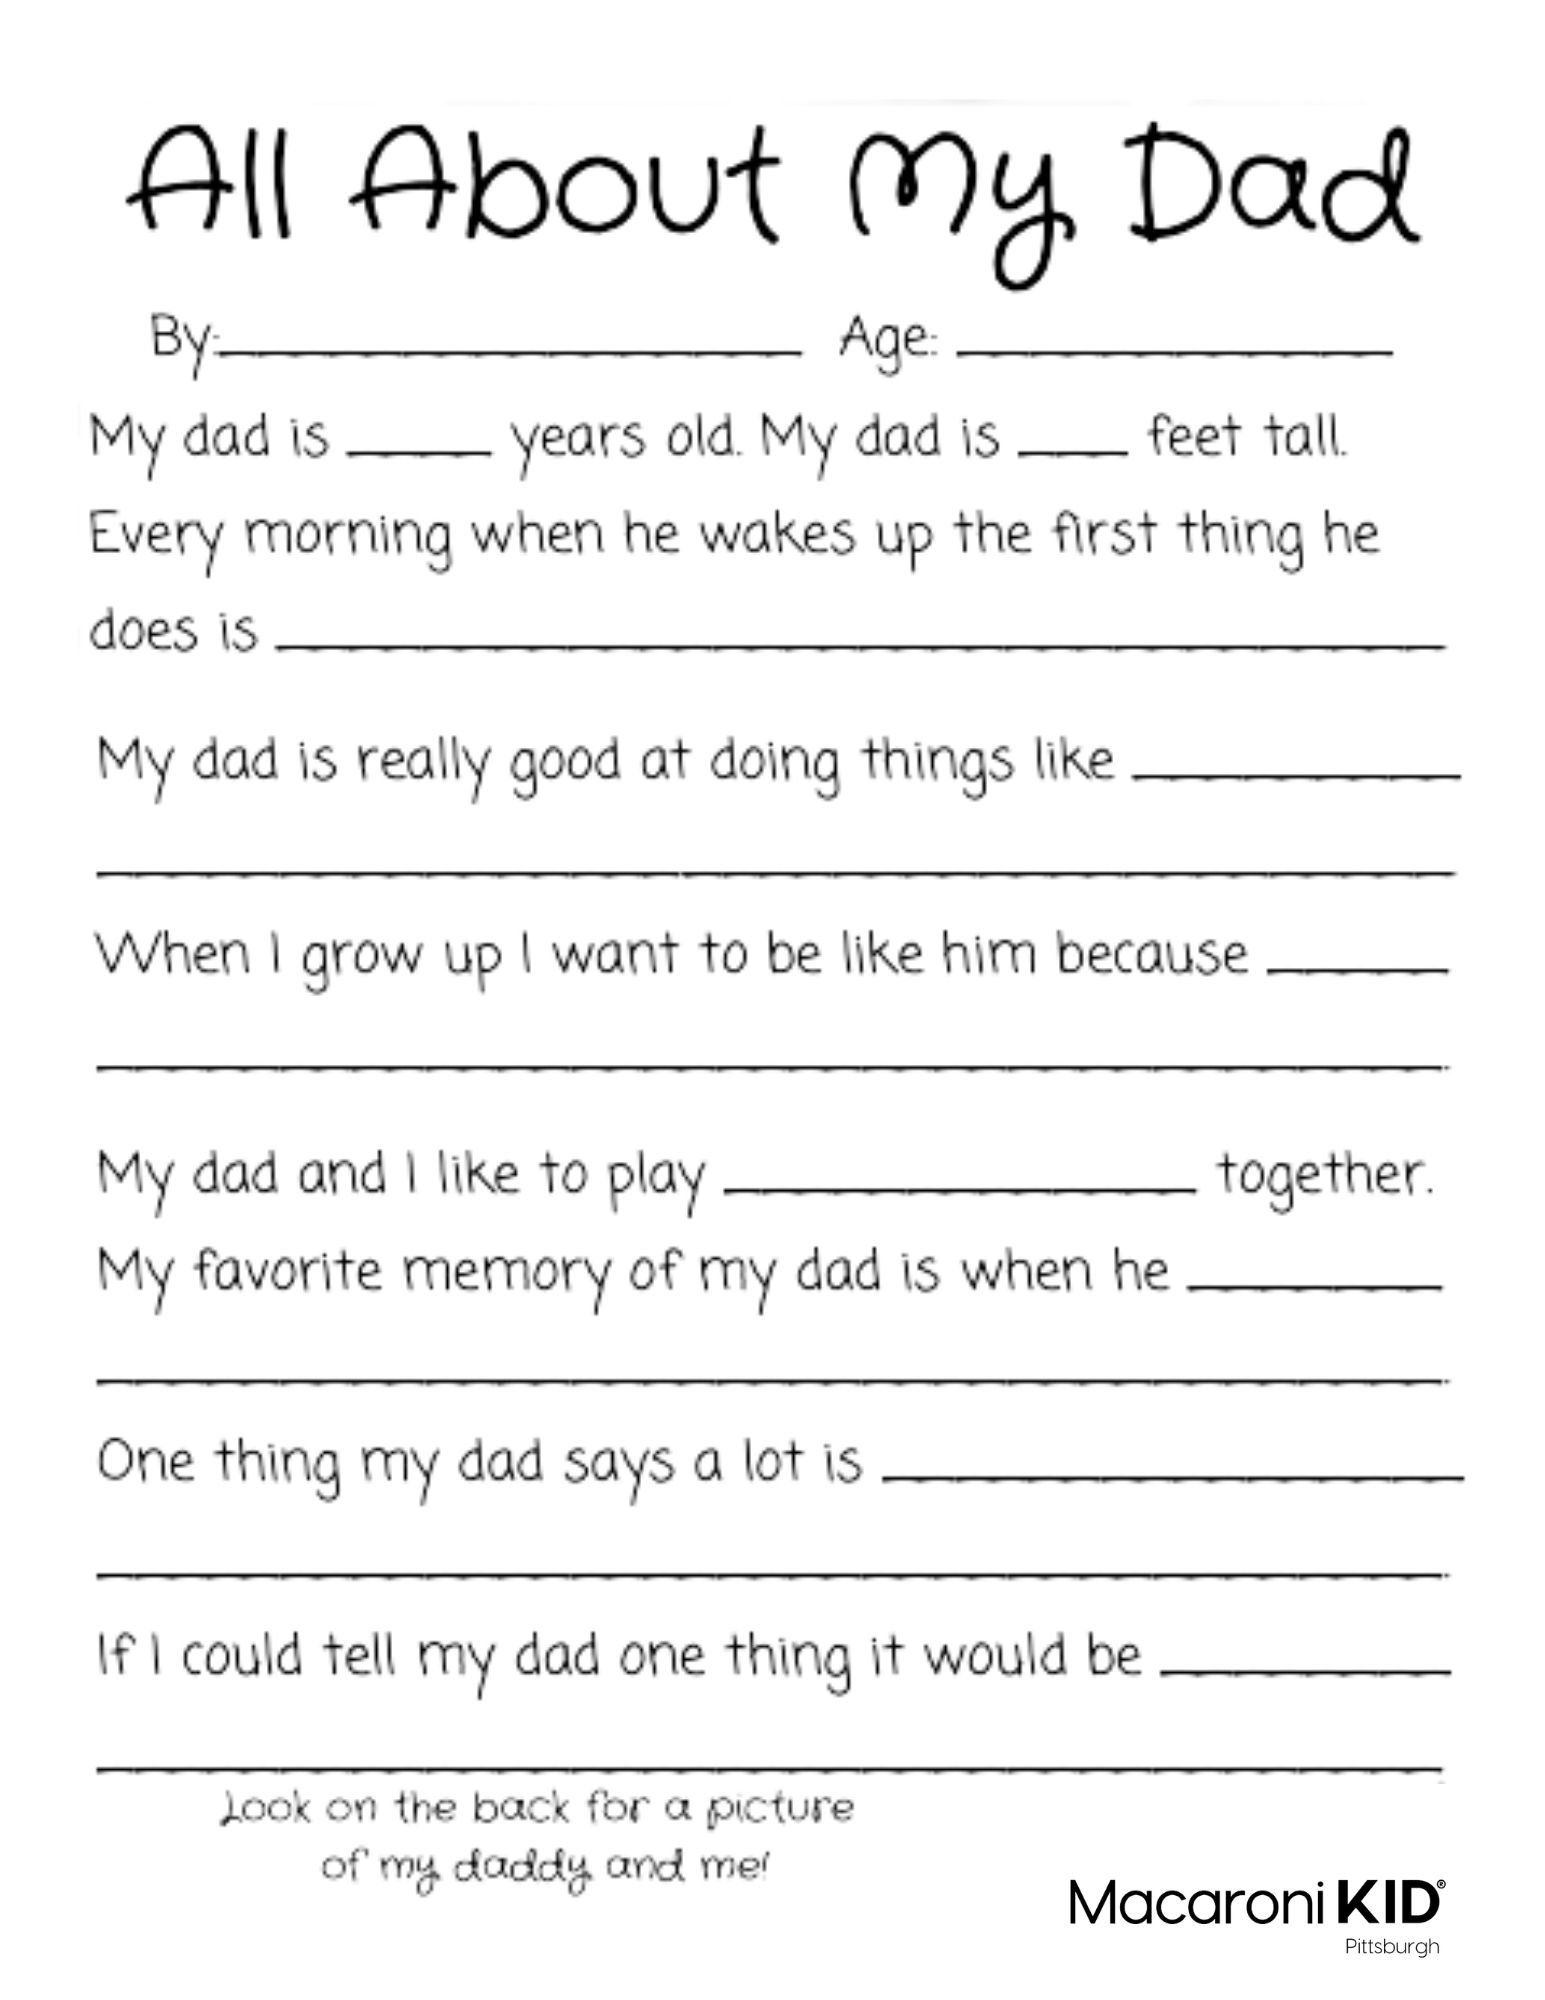 All About My Dad: A Father s Day Questionnaire and Free Printable